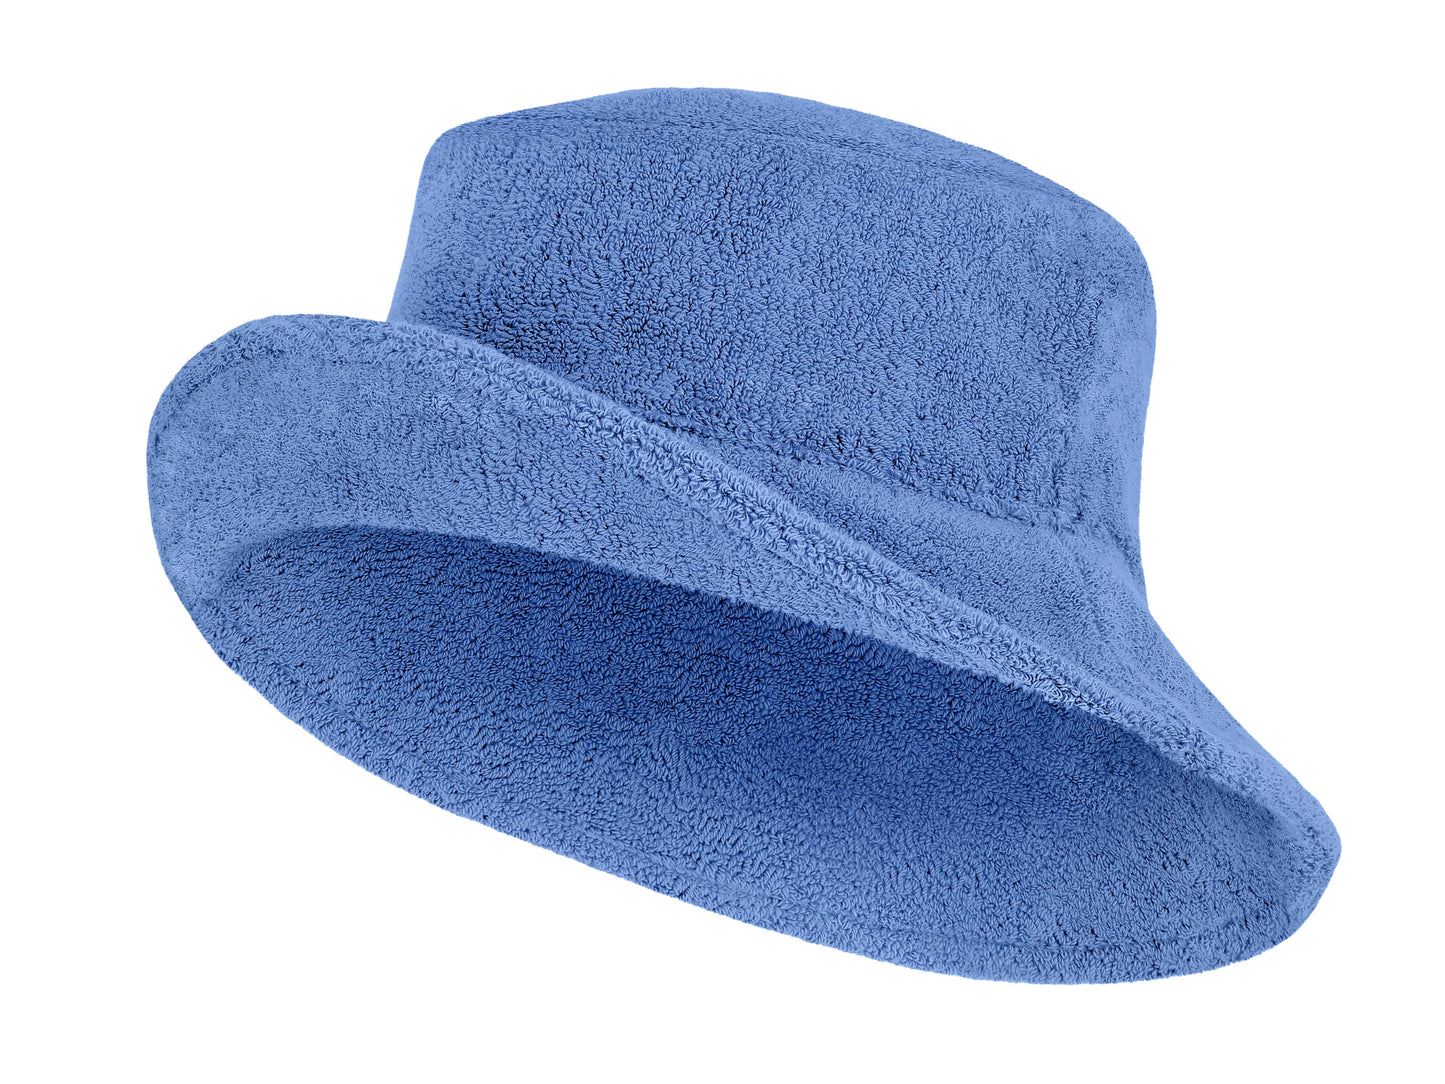 Pacific Towelling Beach Hat